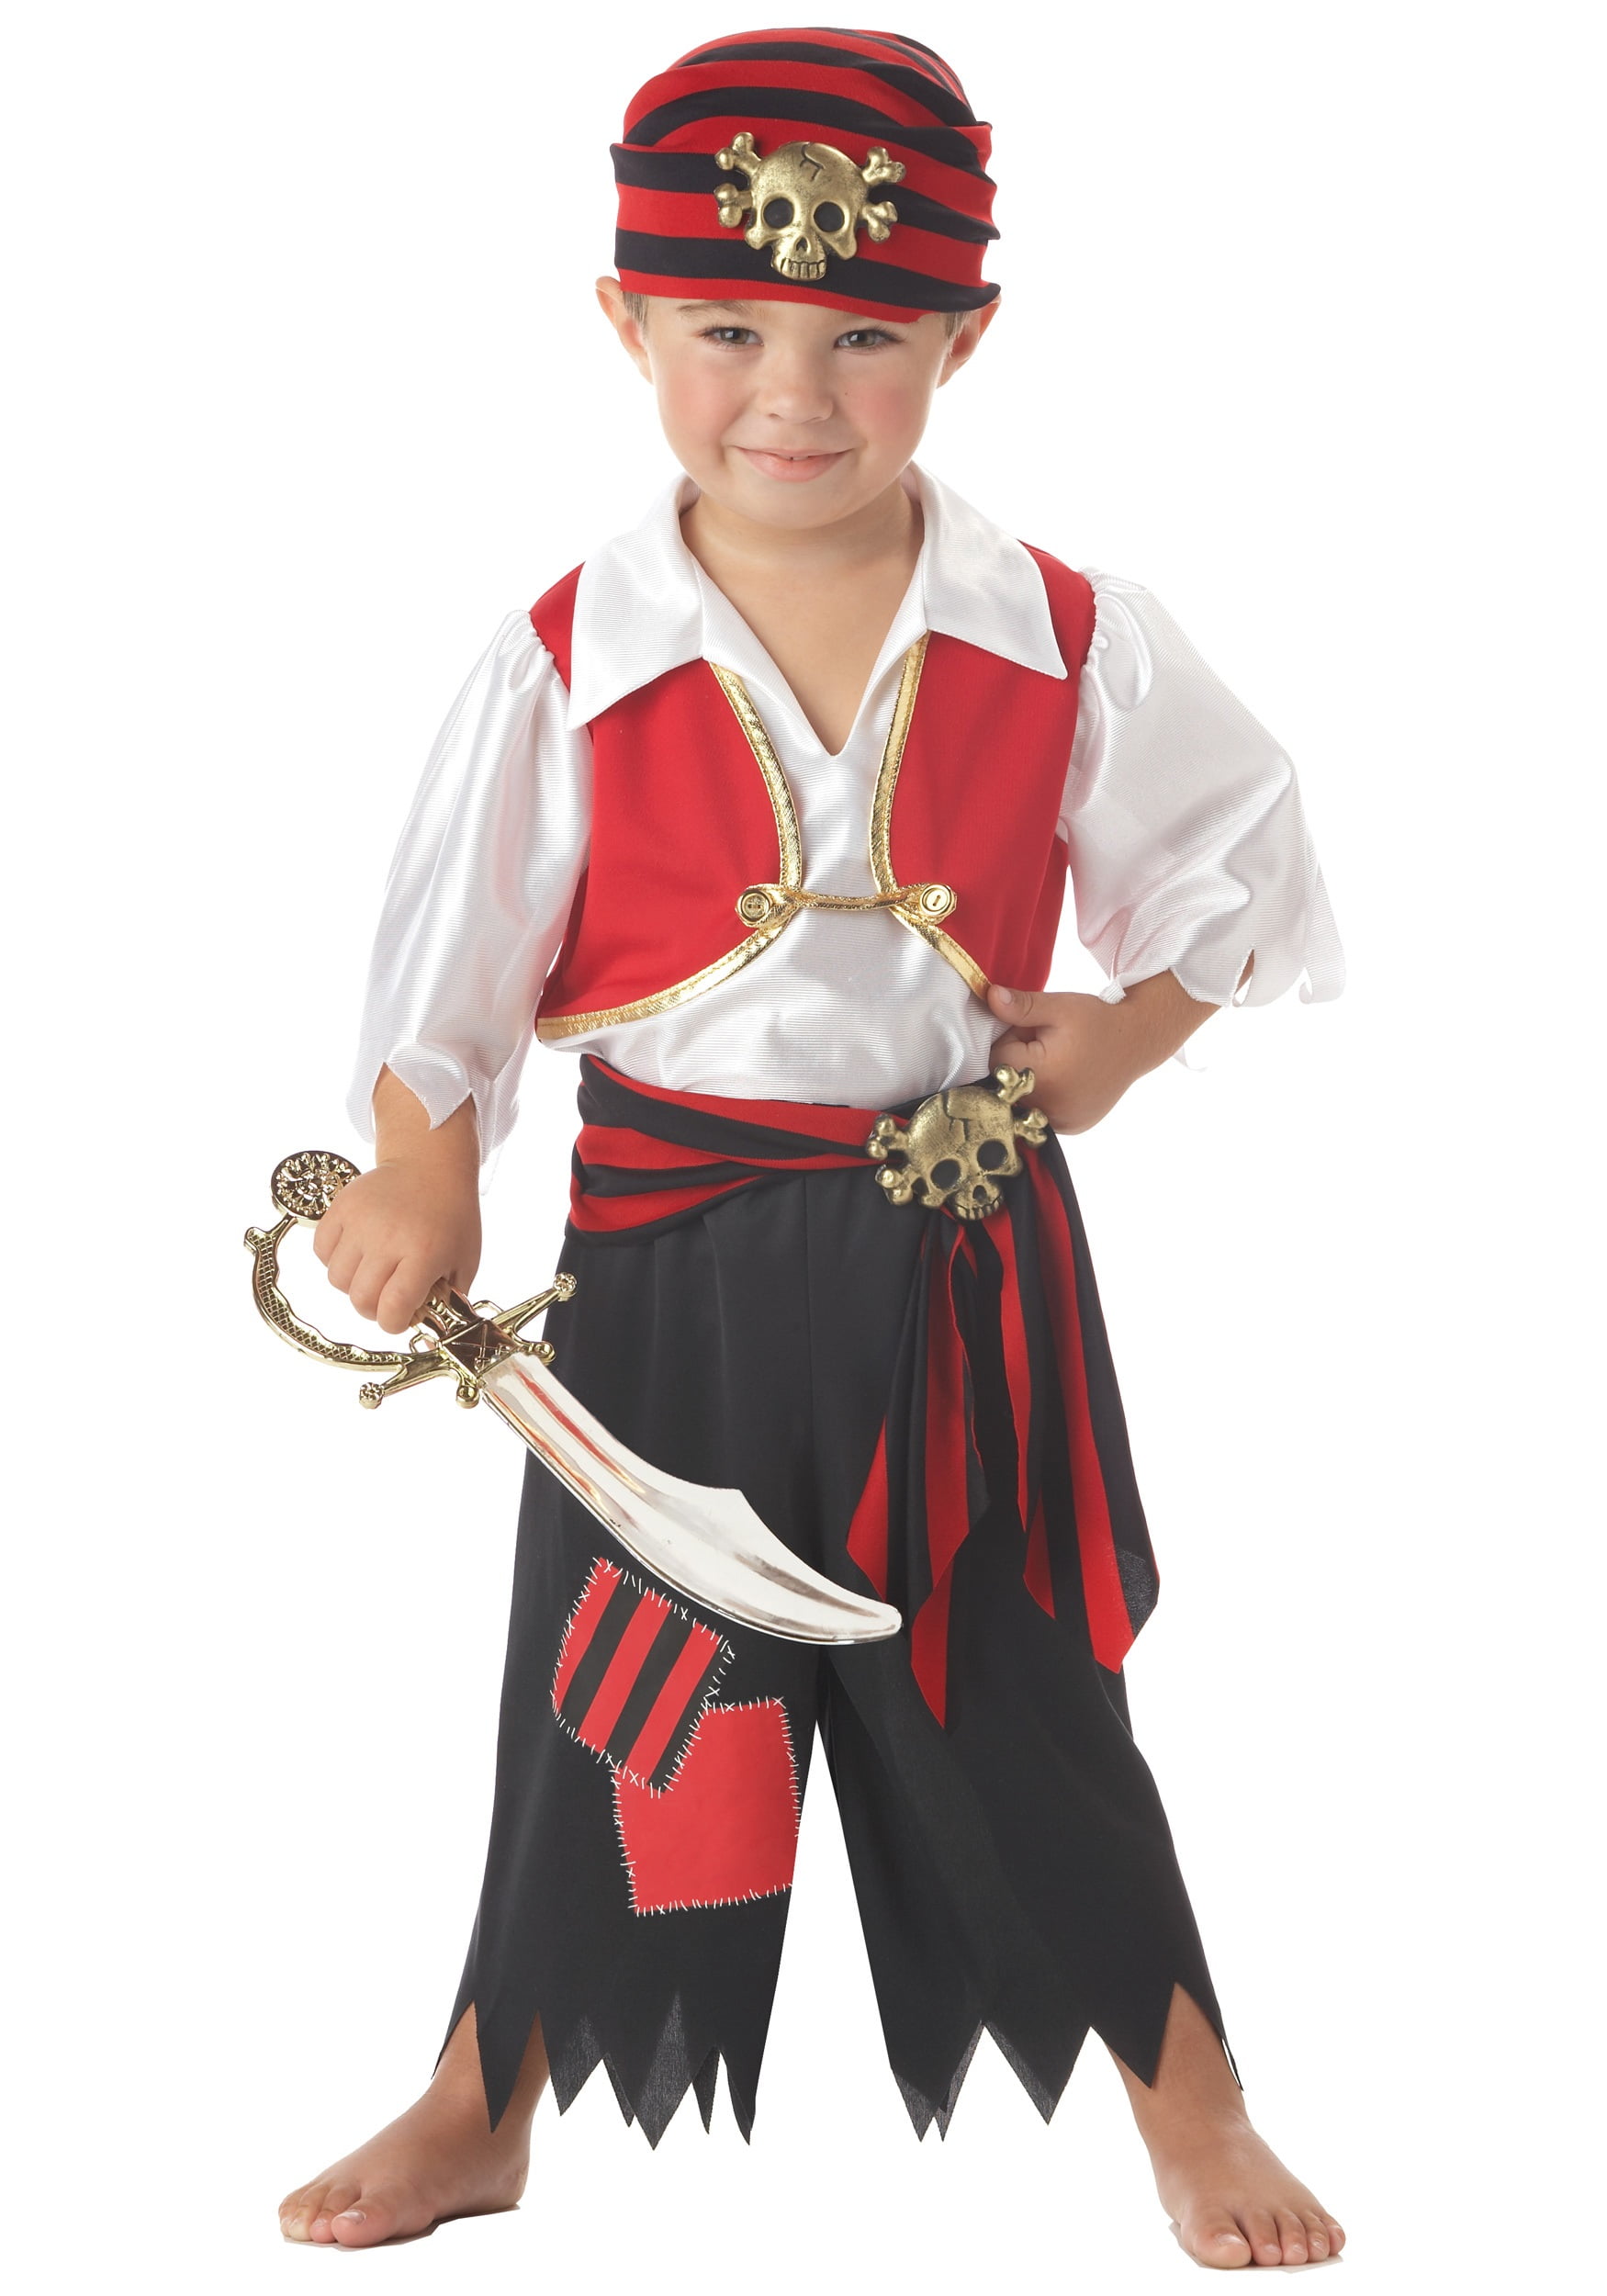 California Costumes Baby Boys Pee Wee Pirate Infant